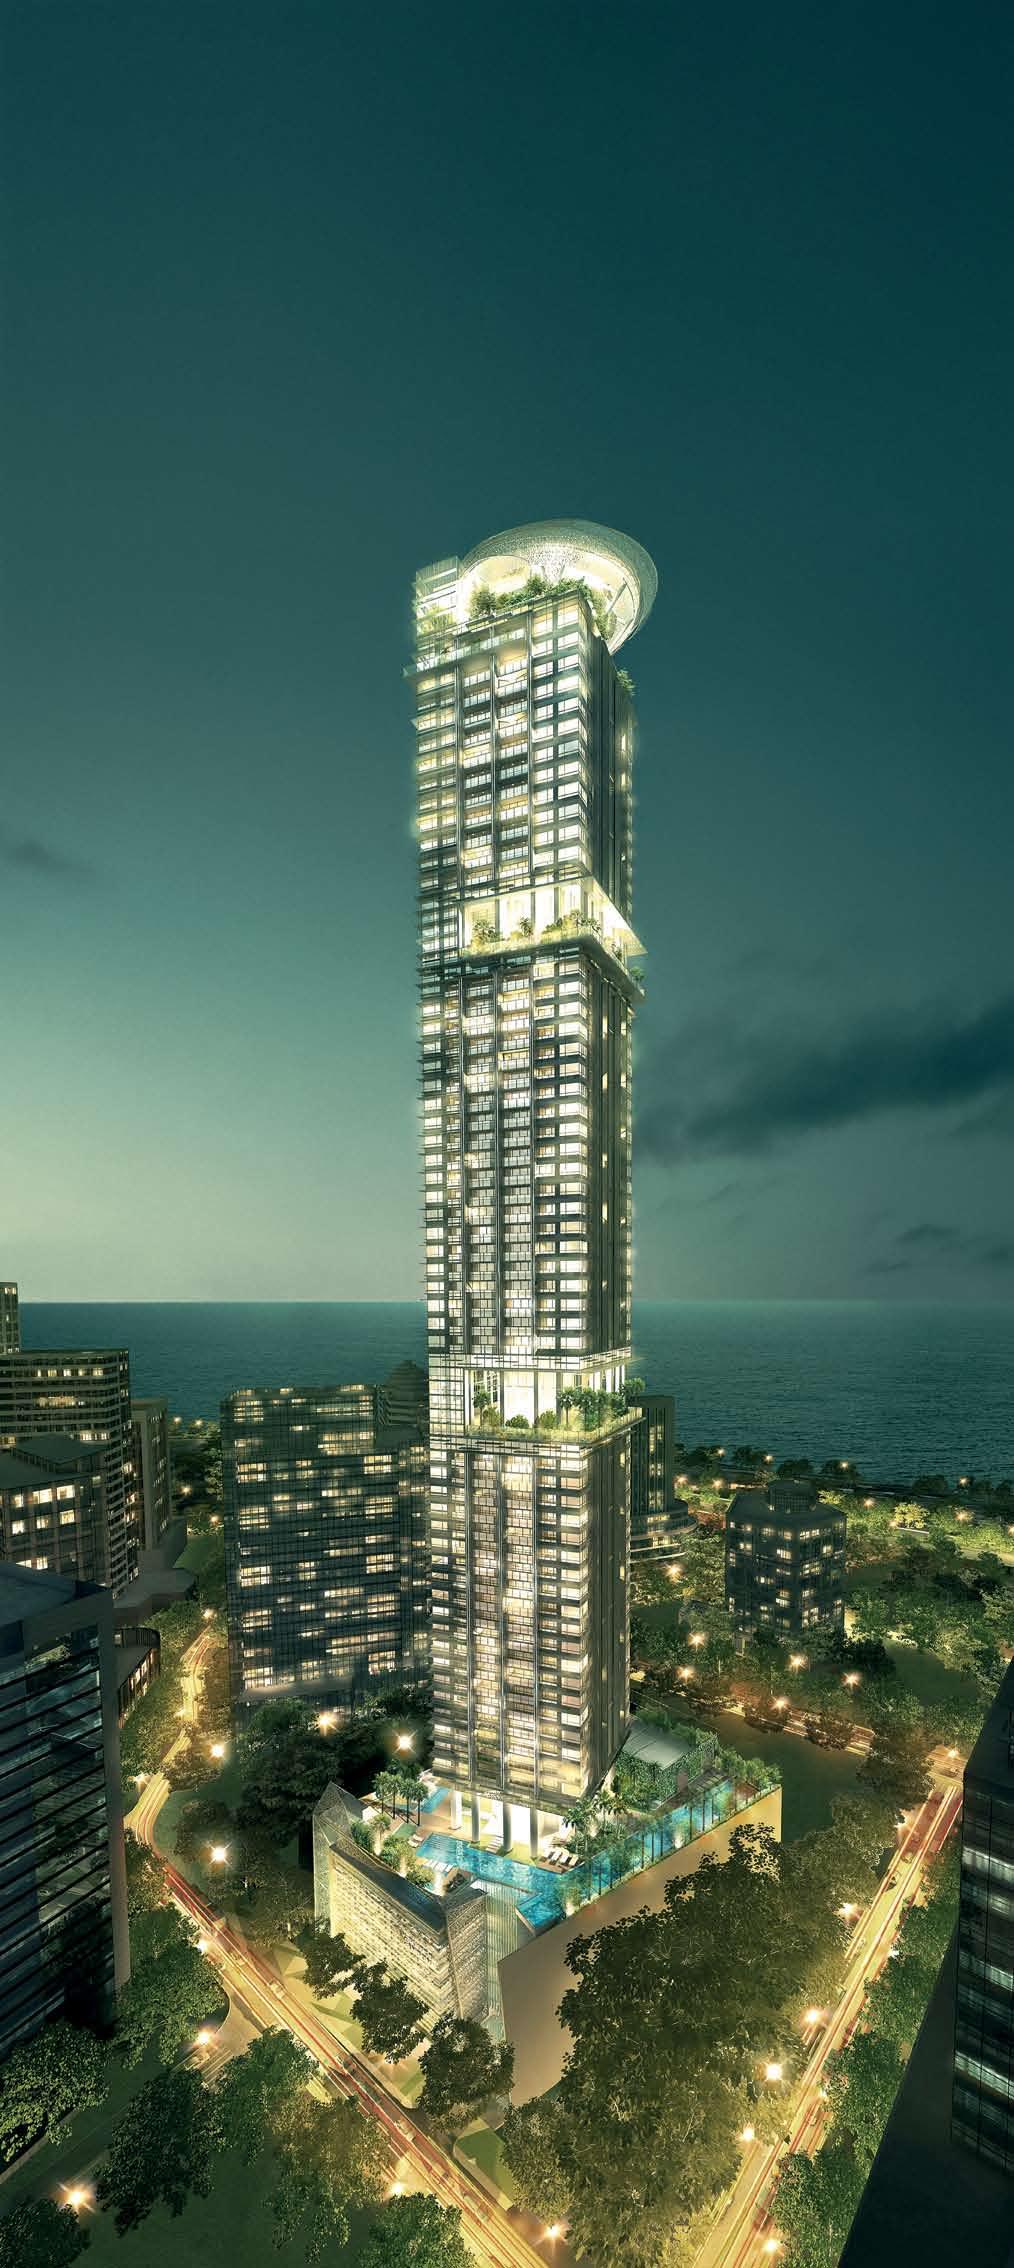 REACH HIGHER. SkySuites@Anson is an iconic development that will reshape the city skyline.